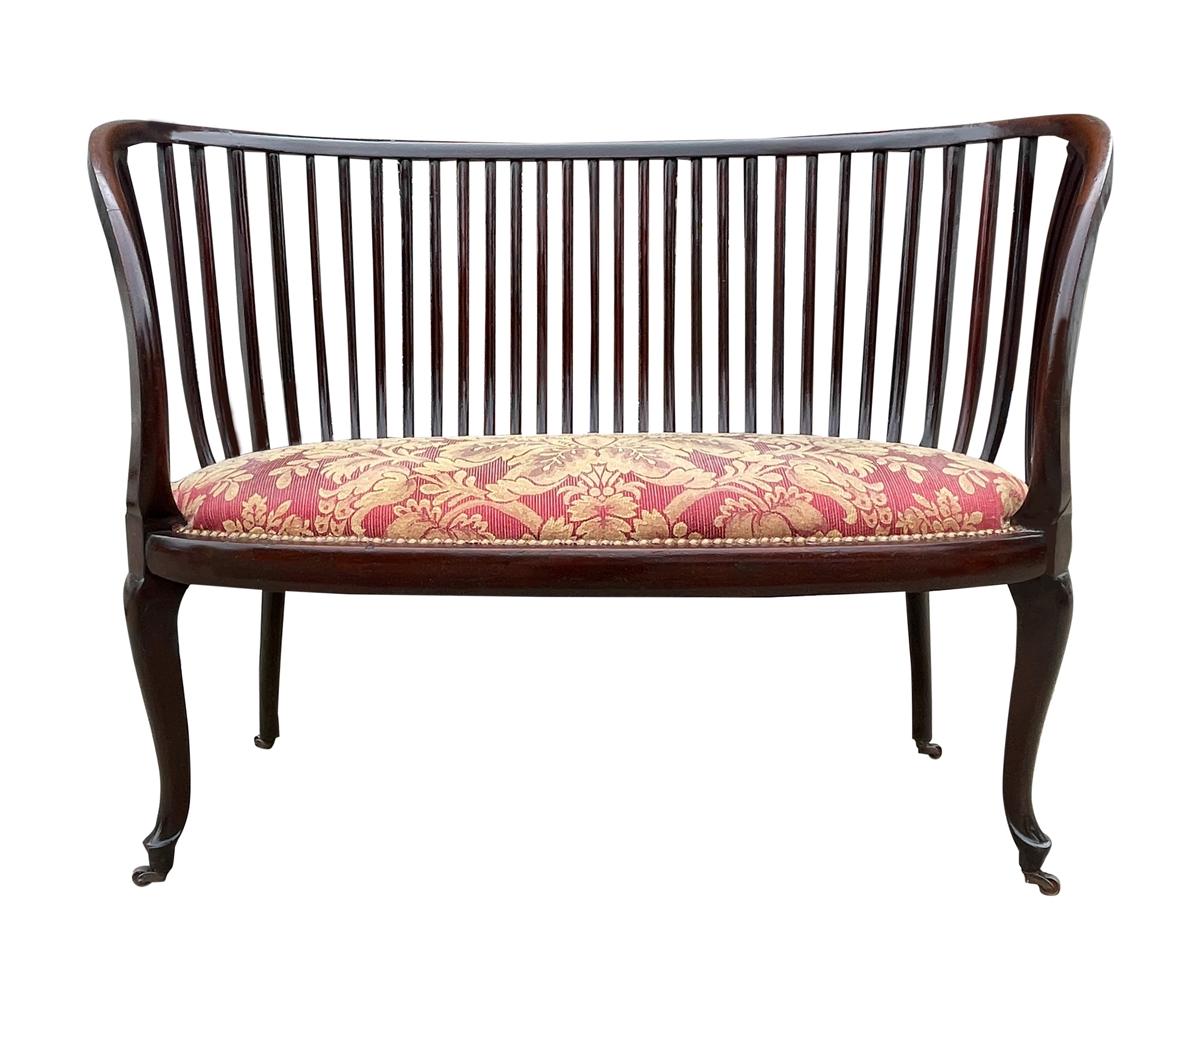 An incredible piece of artistry. This spindle back bench dates back to the 1940's and is made out of mahogany. A great mix of modern and traditional lines.